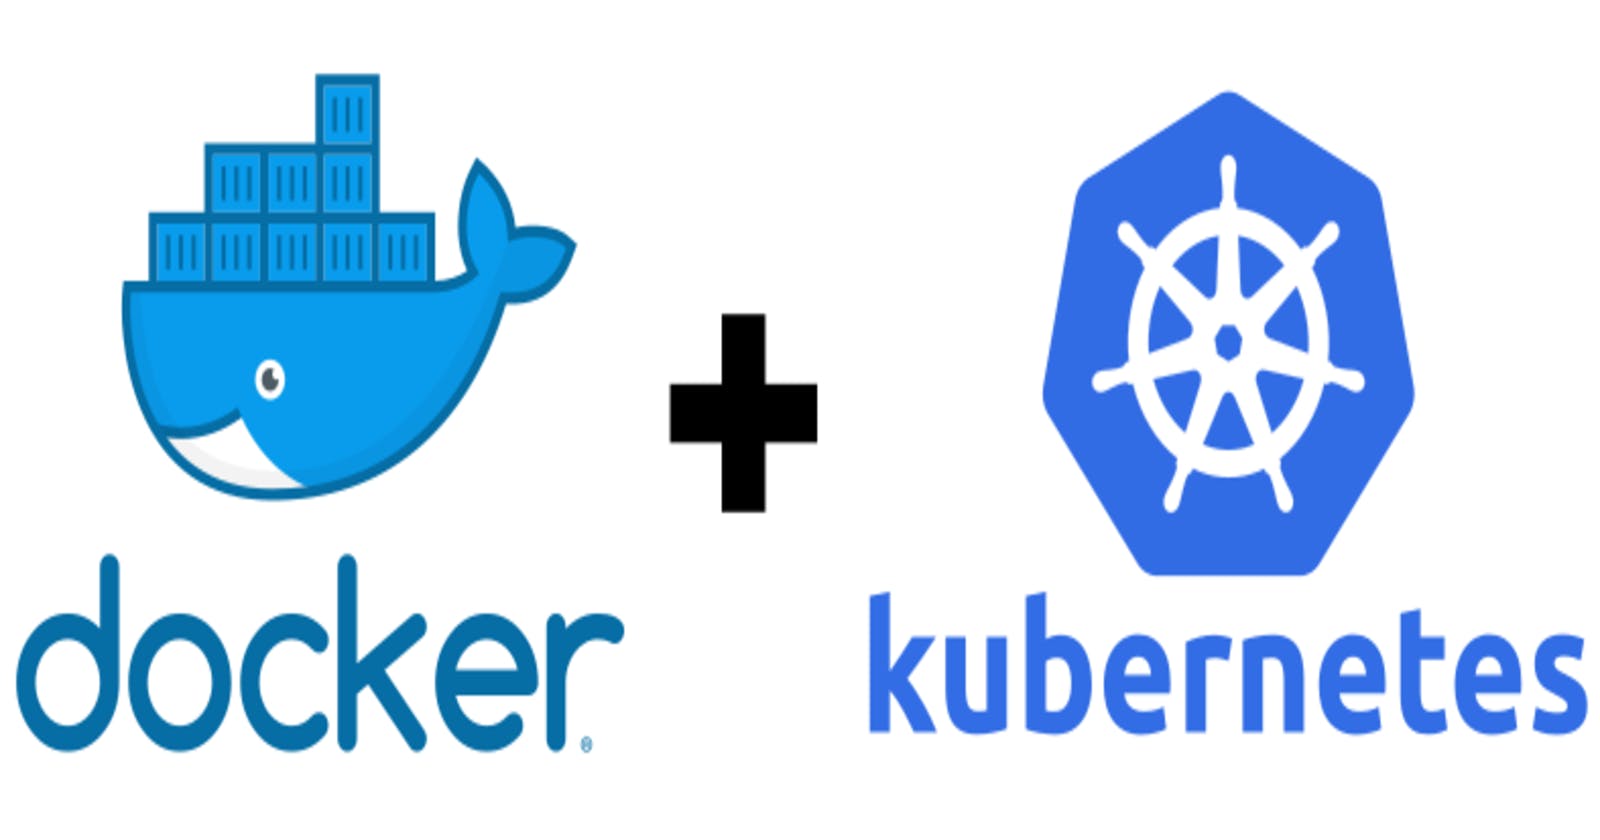 Microservices, Docker and Kubernetes concepts for the Absolute Beginners.